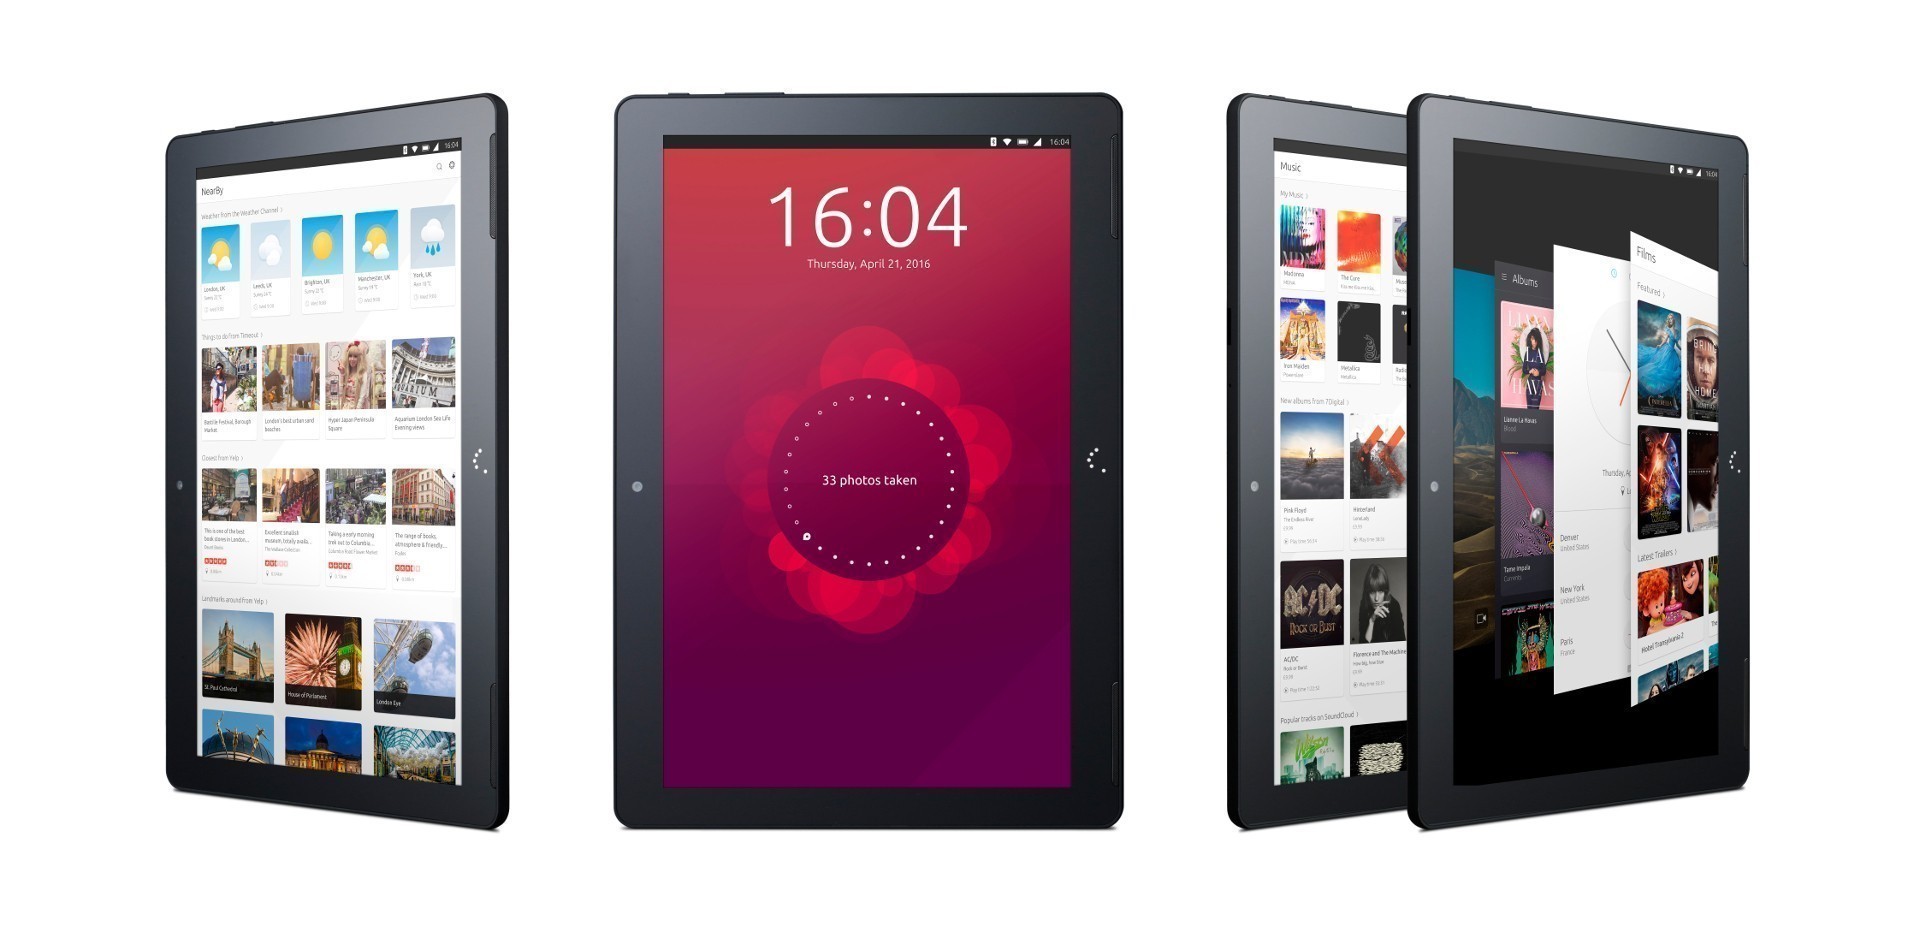 ubuntu-touch-ota-14-officially-released-